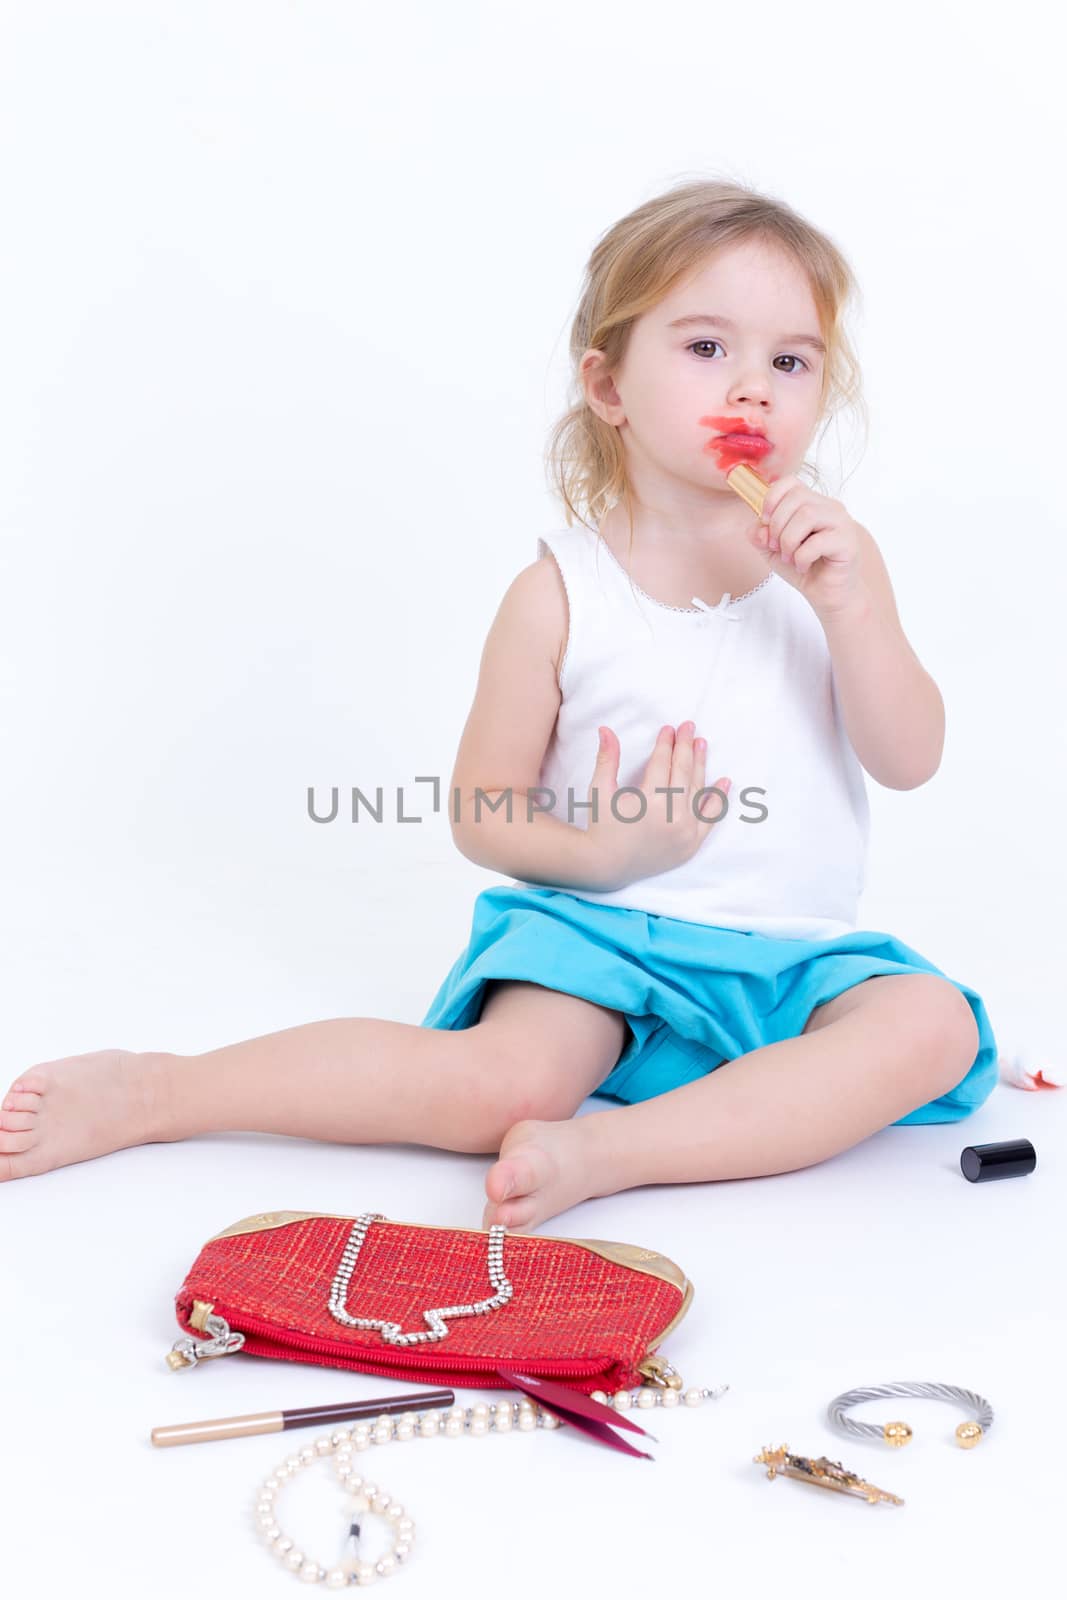 Adorable small girl playing with makeup by coskun